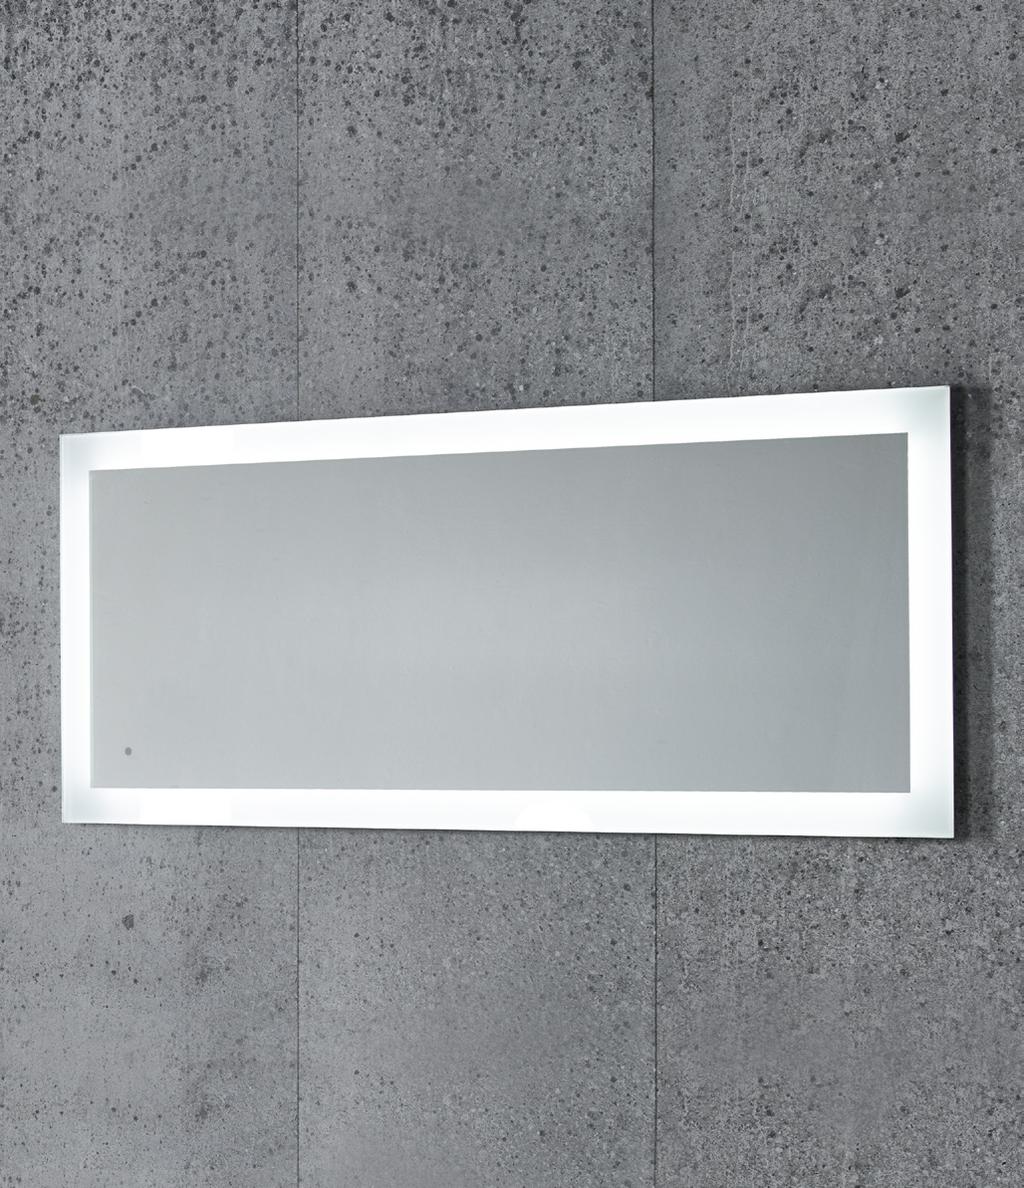 00 Drift LED Illuminated Mirror 1200(w) x 500(h) x 30(d)mm Features: Energy efficient LED lighting, Heated